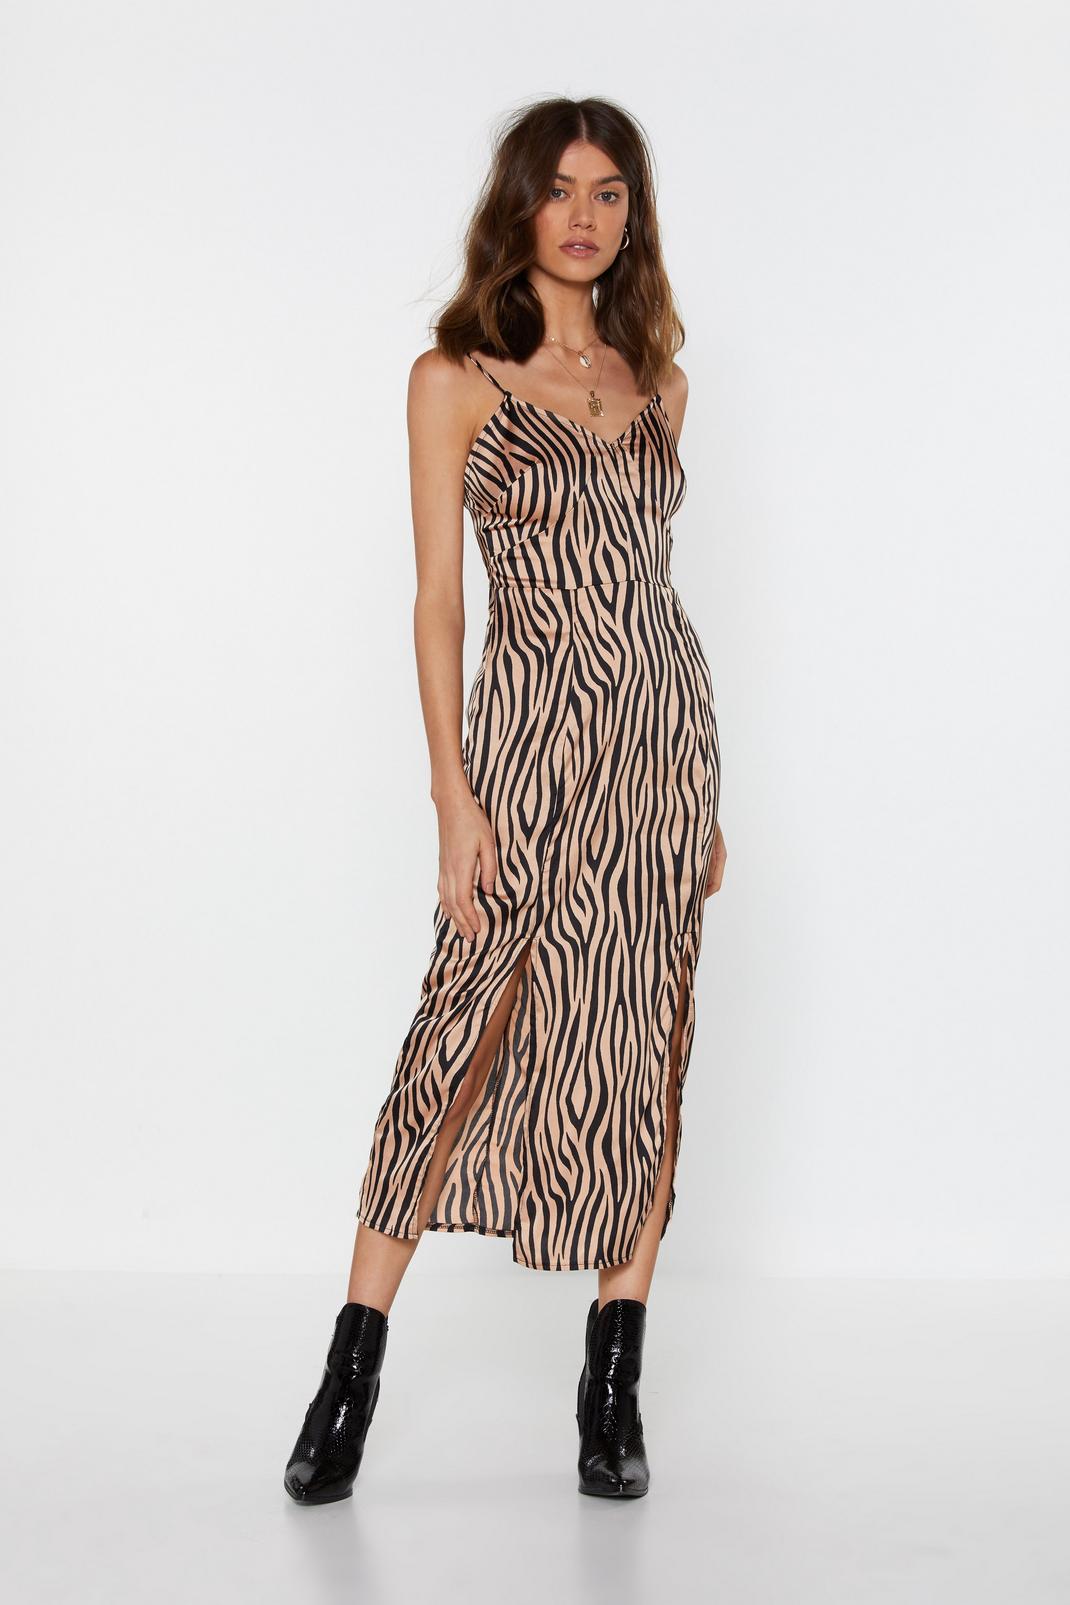 Brown It's Not All Black and White Zebra Midi Dress image number 1